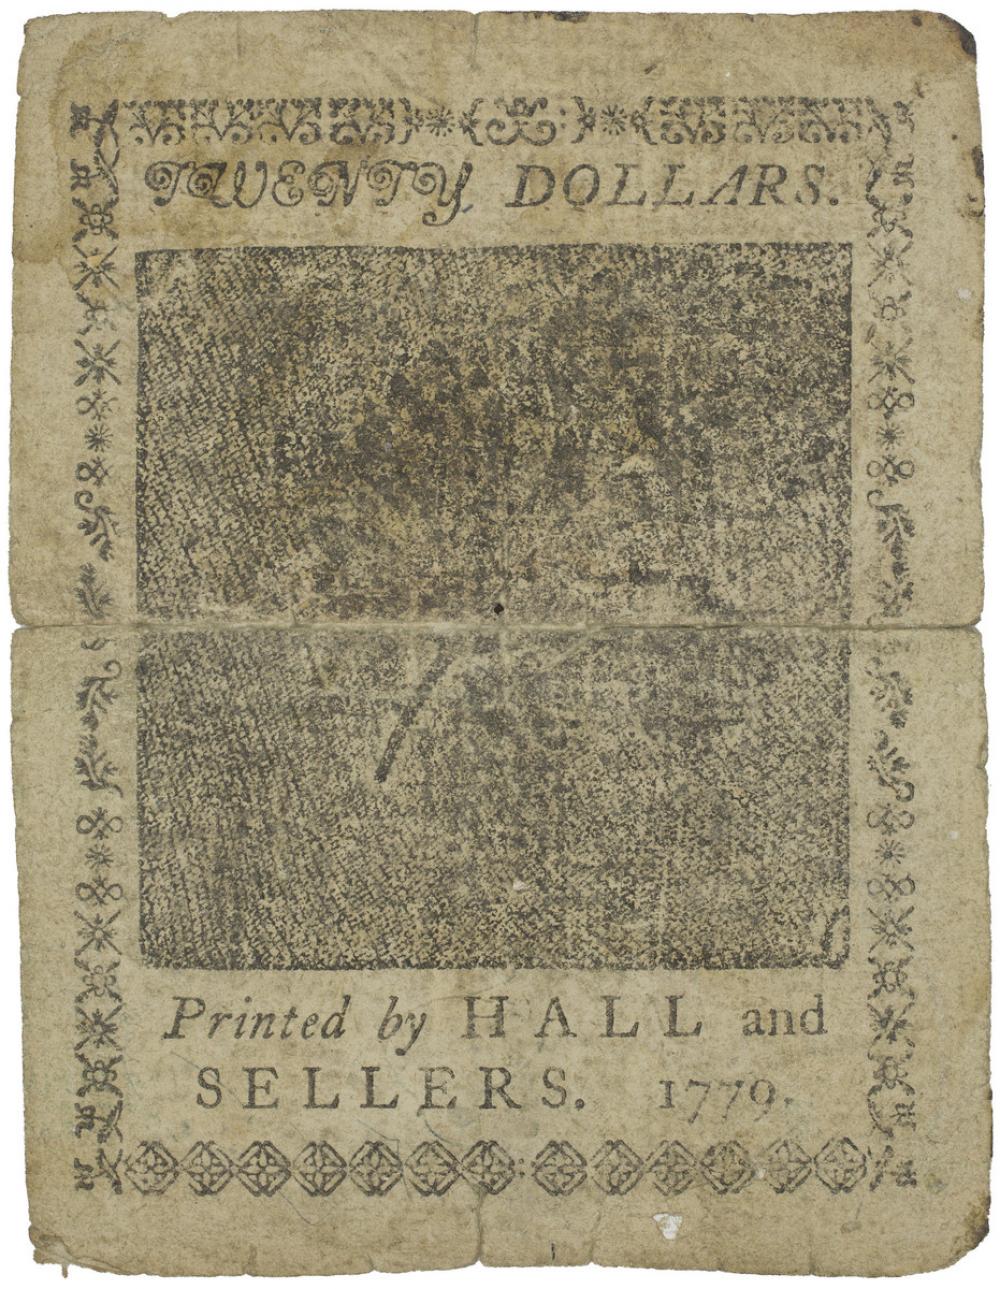 United States of America; Hall and Sellers (printers), Twenty dollar note